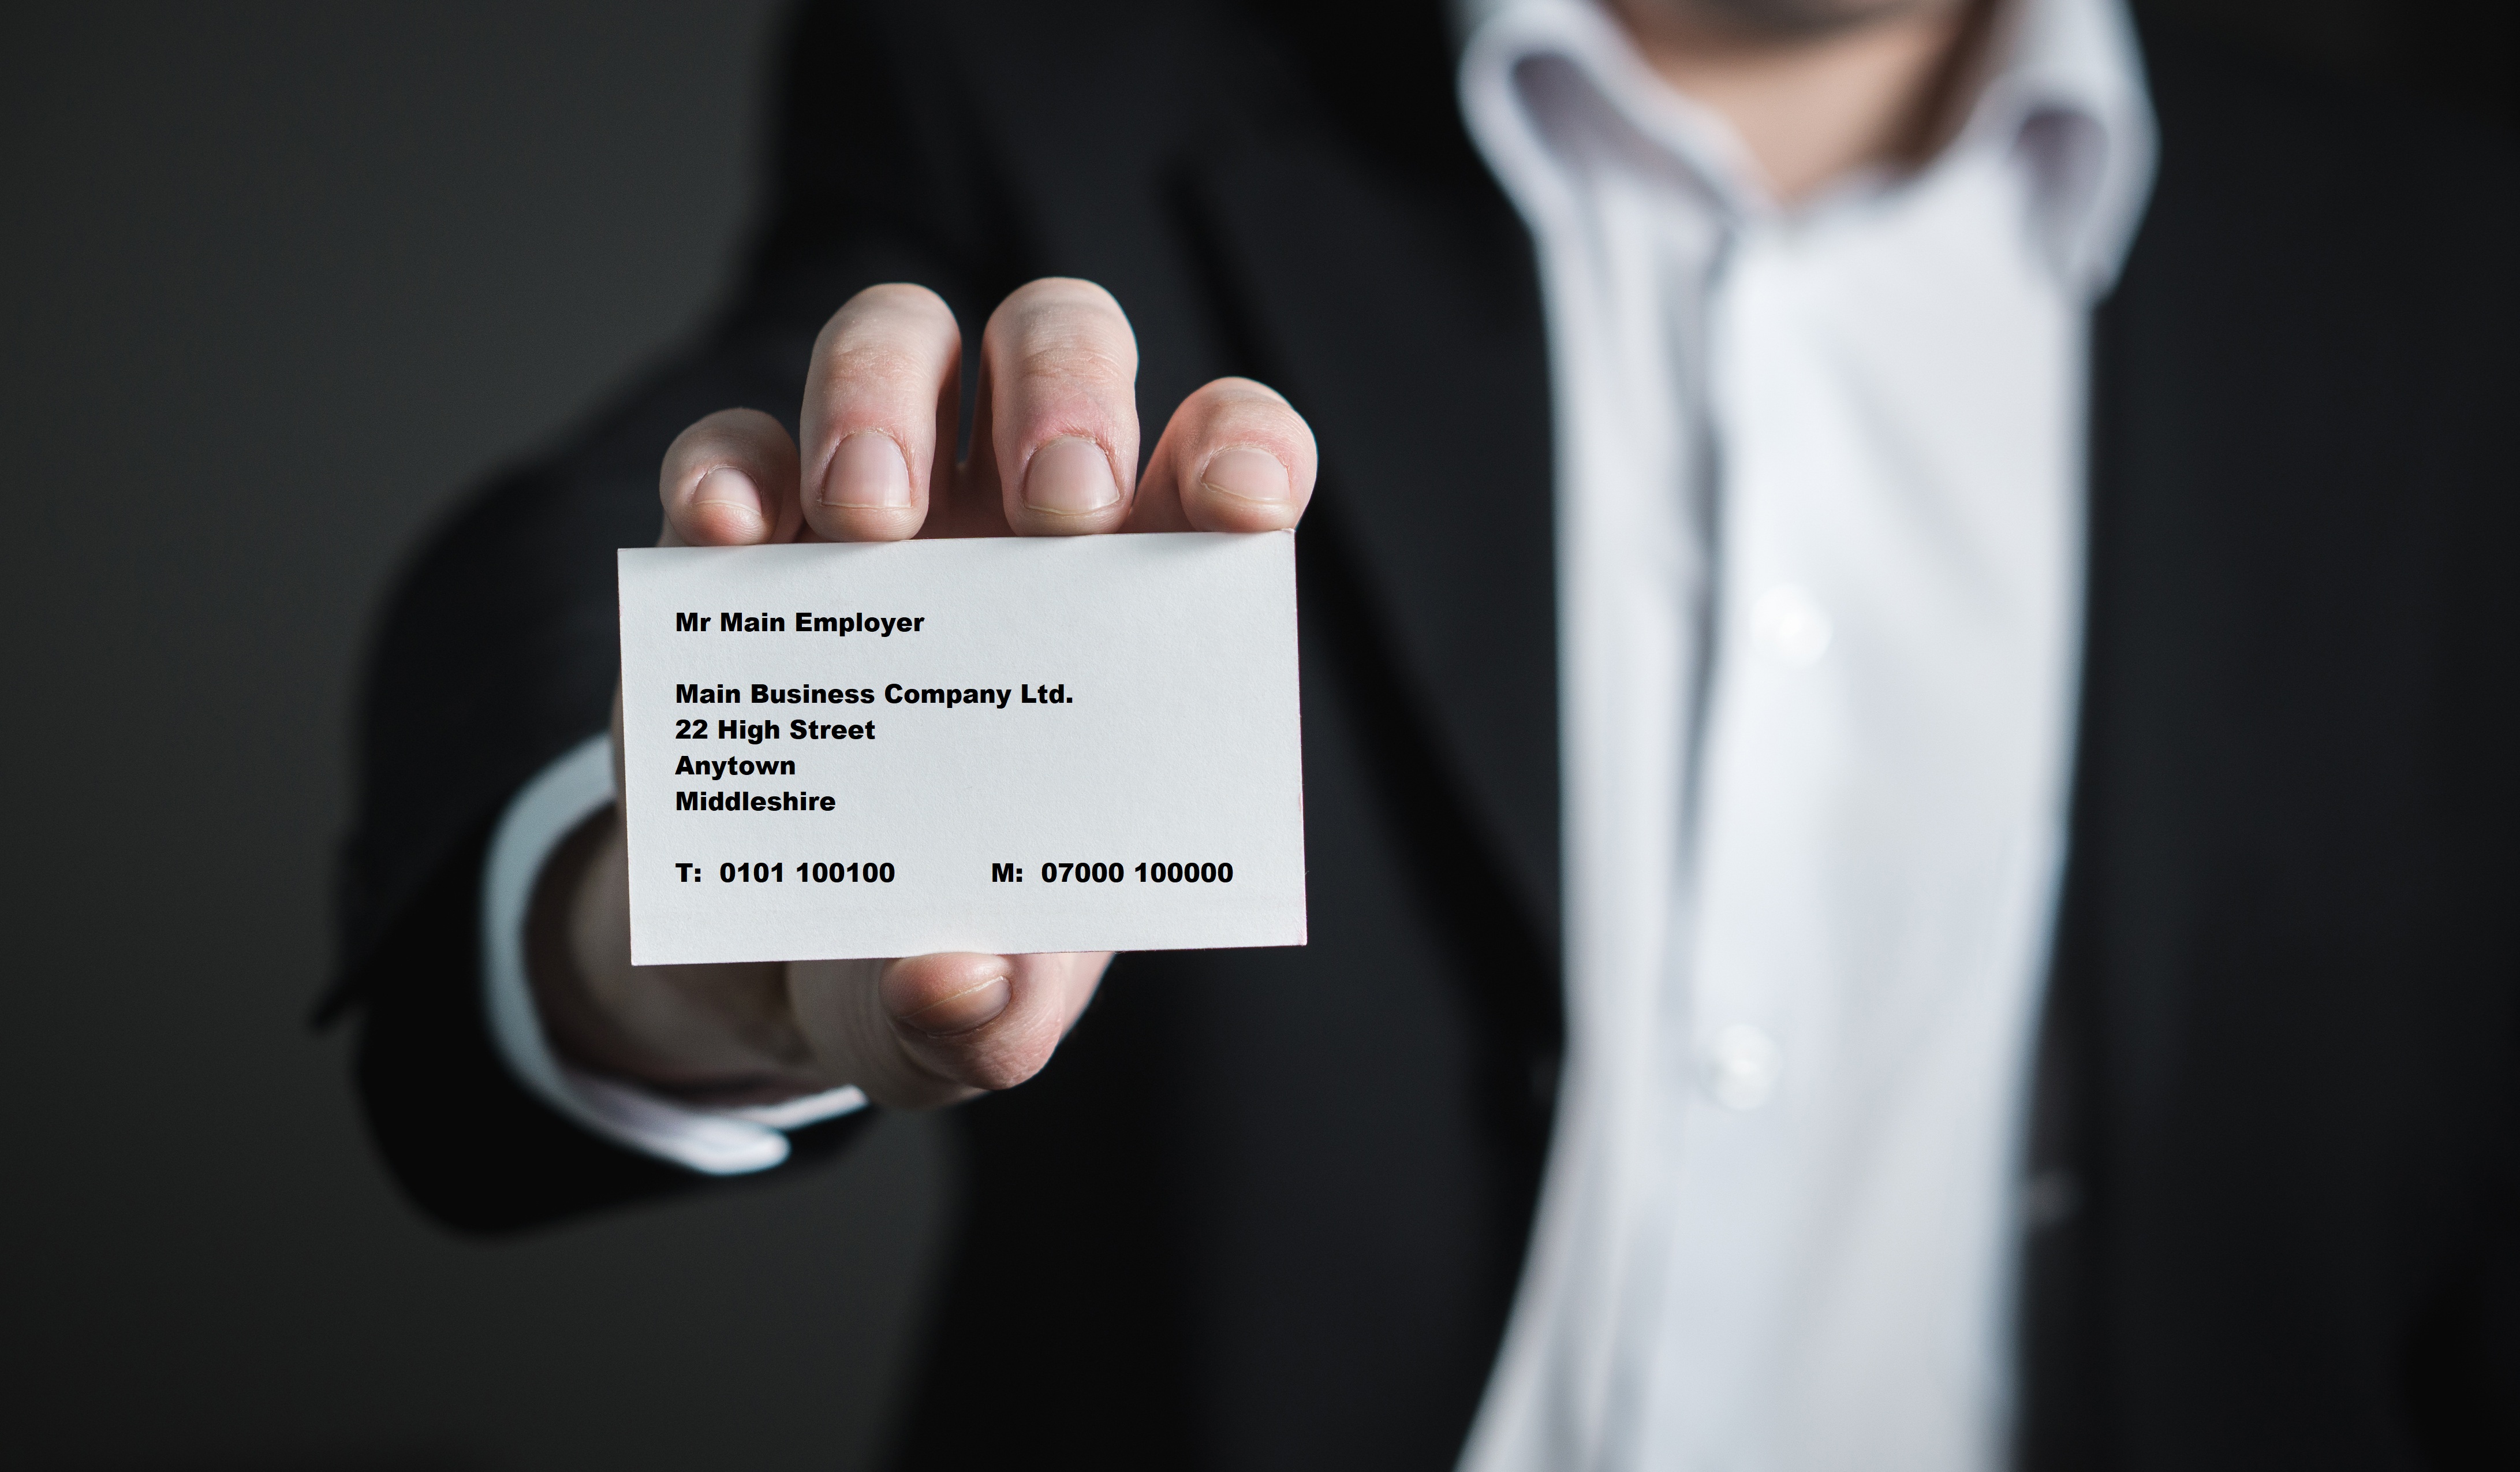 Employer showing his business card